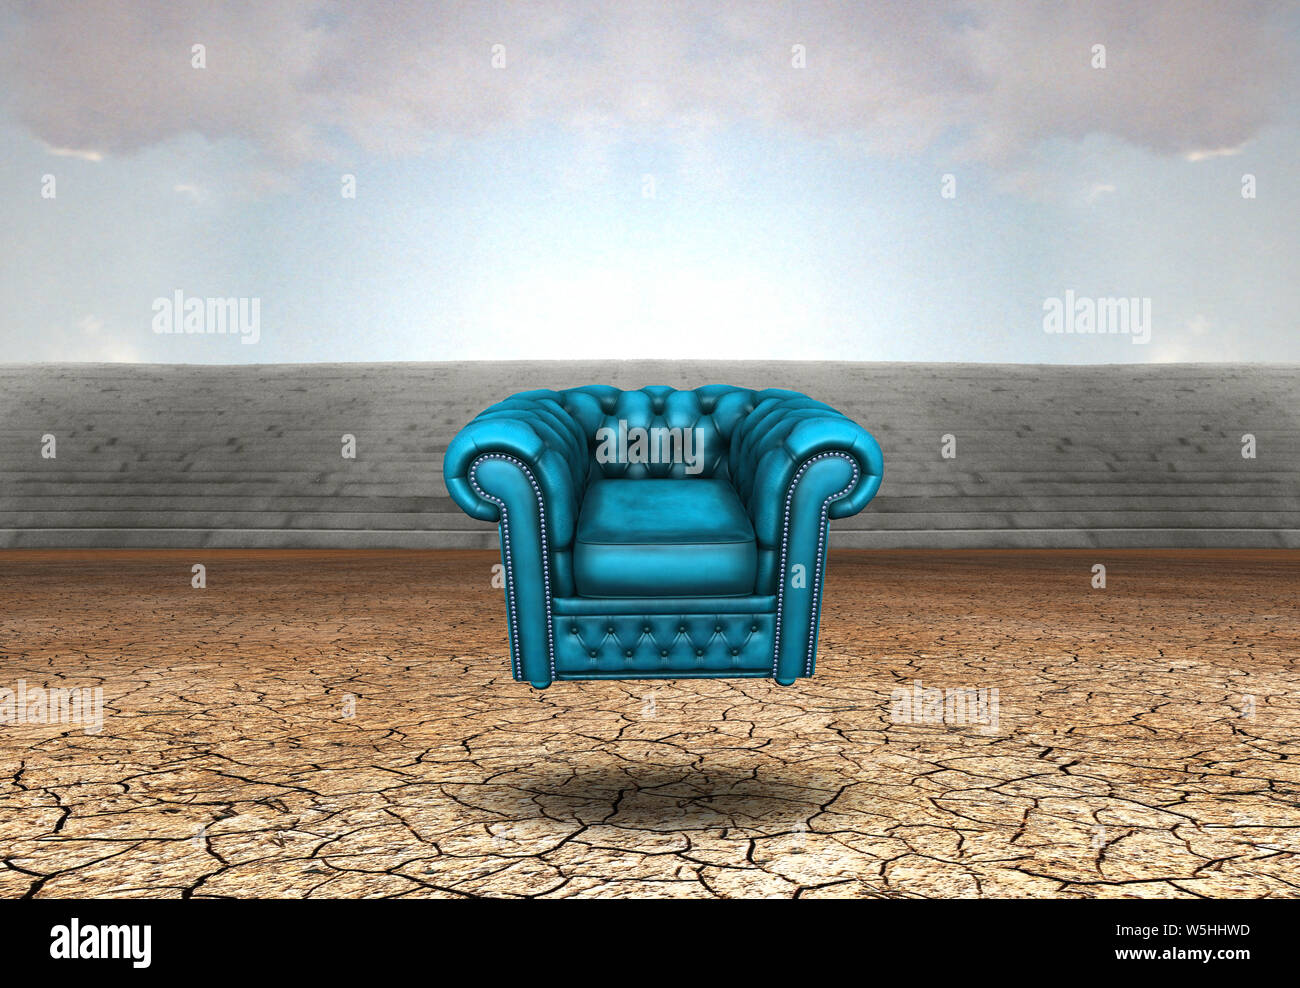 Surrealism. Blue armchair in arid land Stock Photo